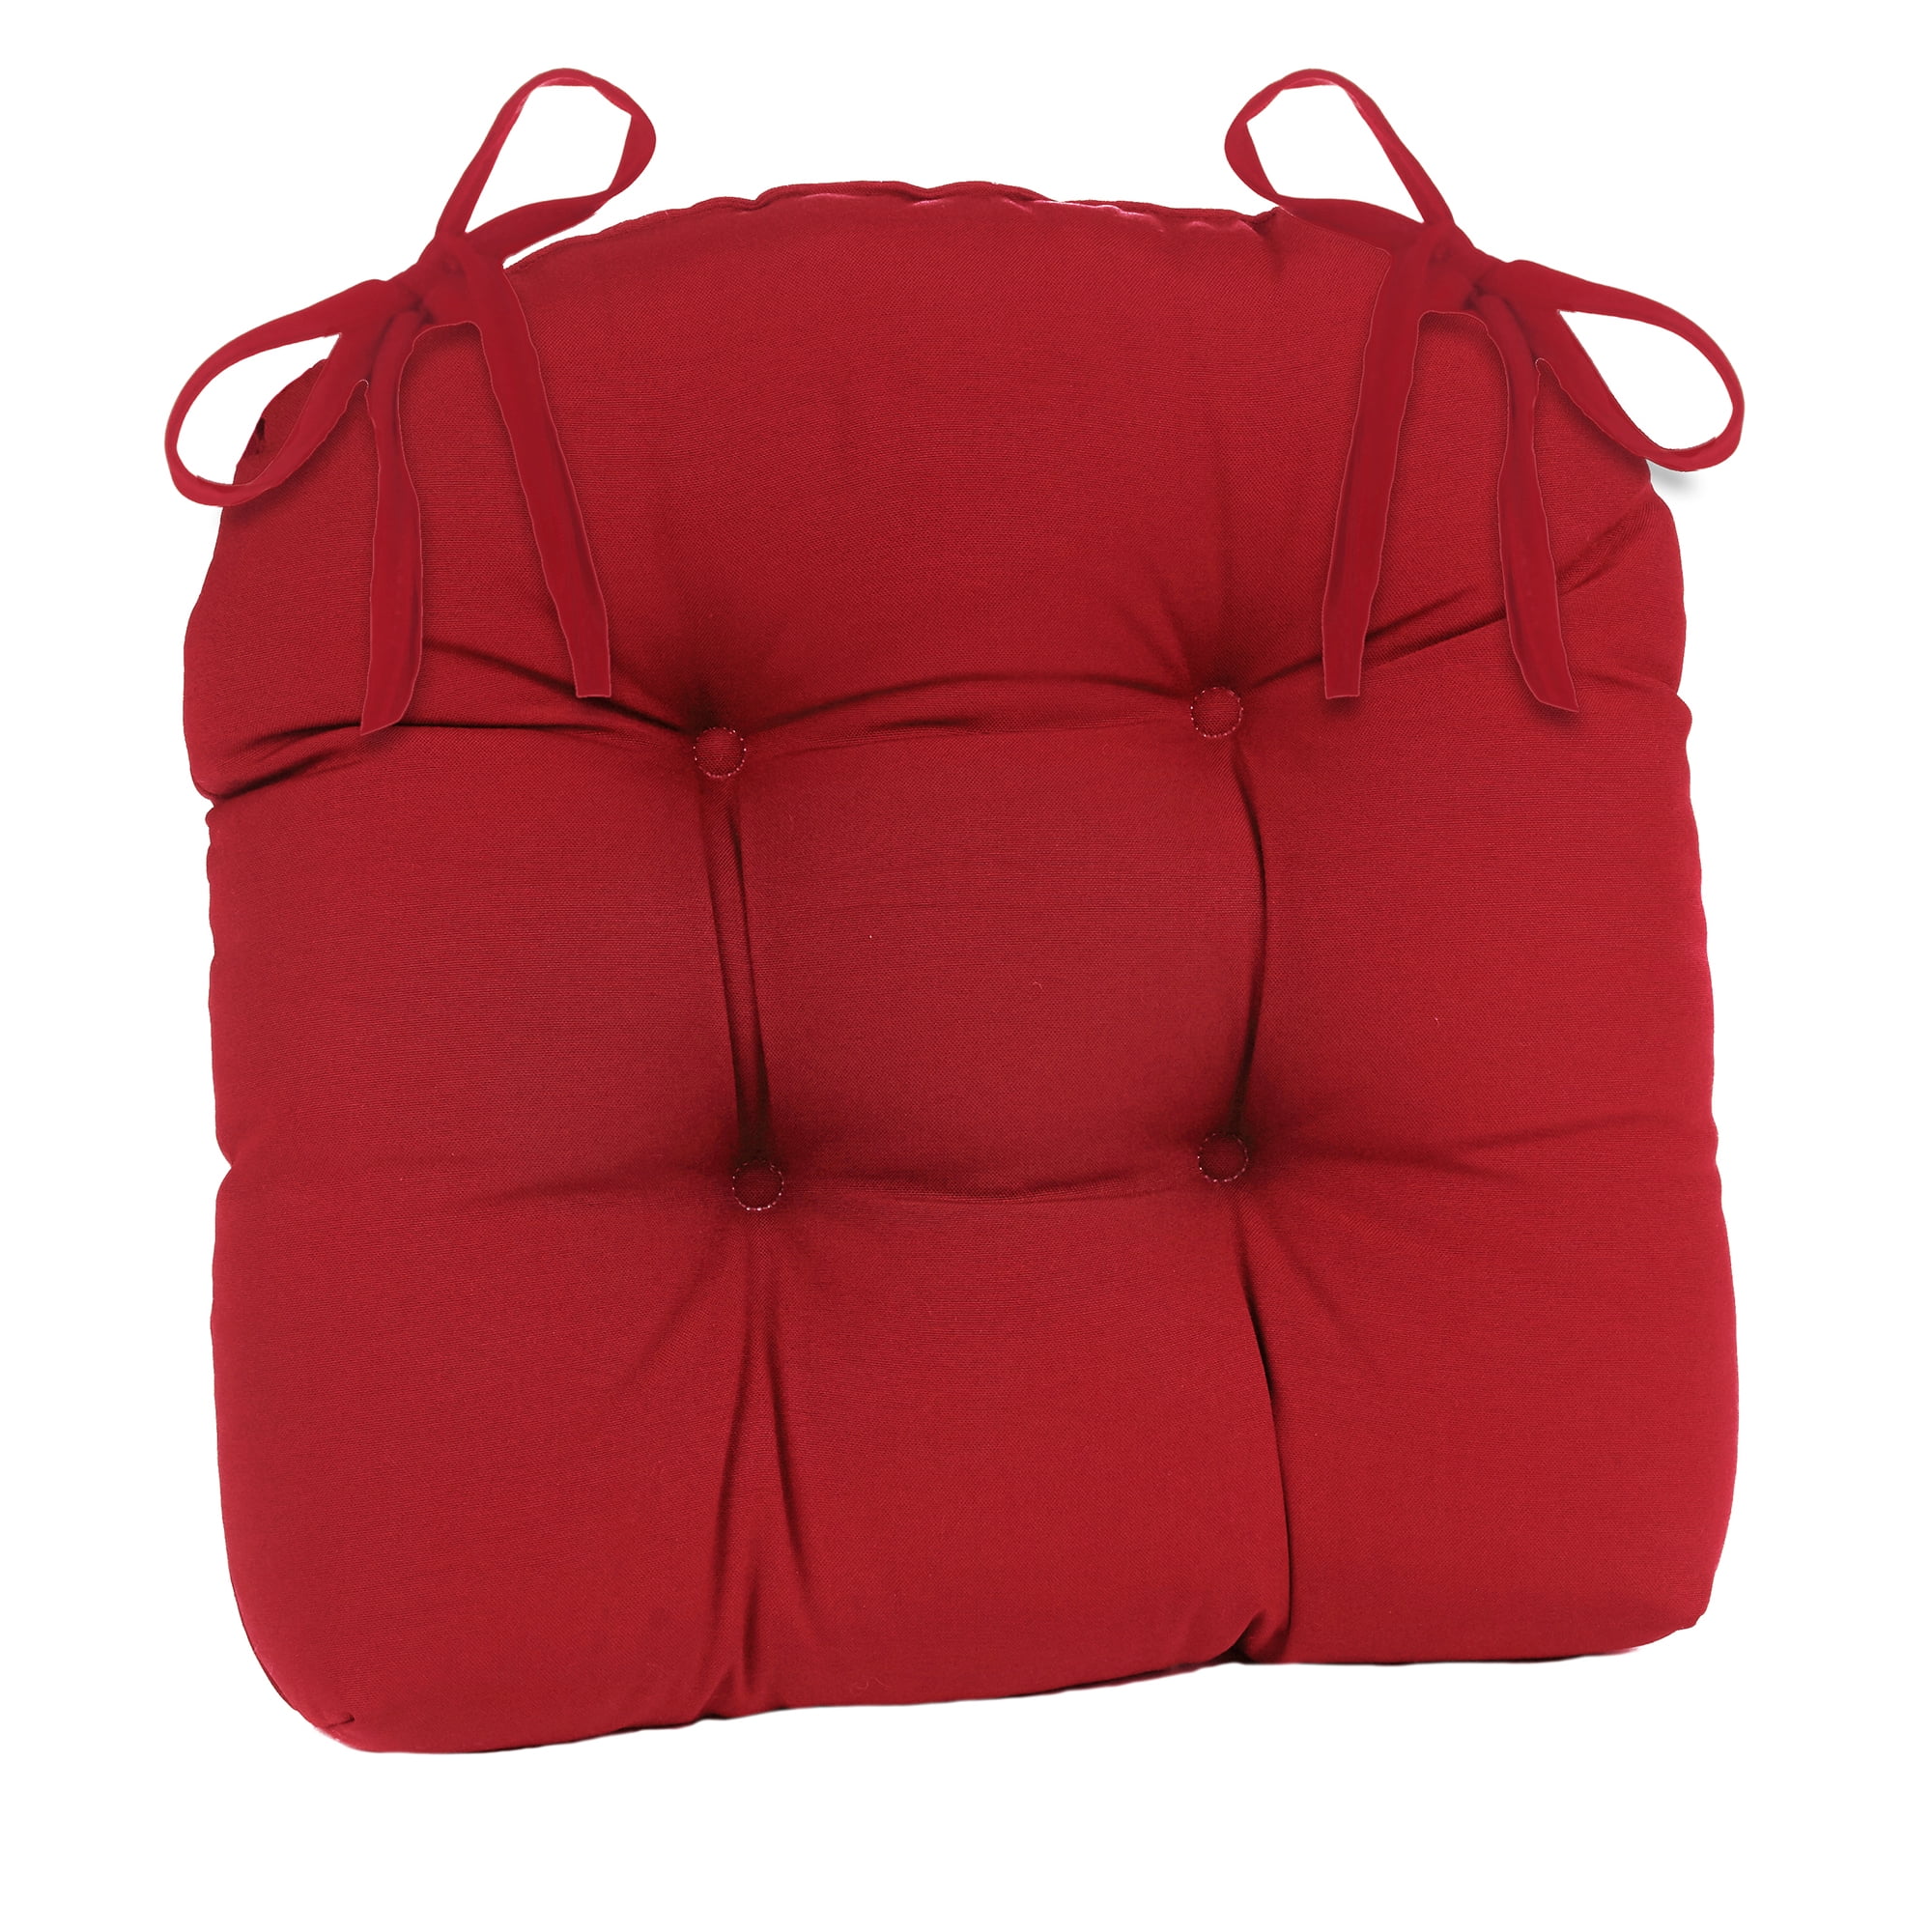 Patio Outdoor/Indoor Red Extra Large Chair Cushion - Walmart.com